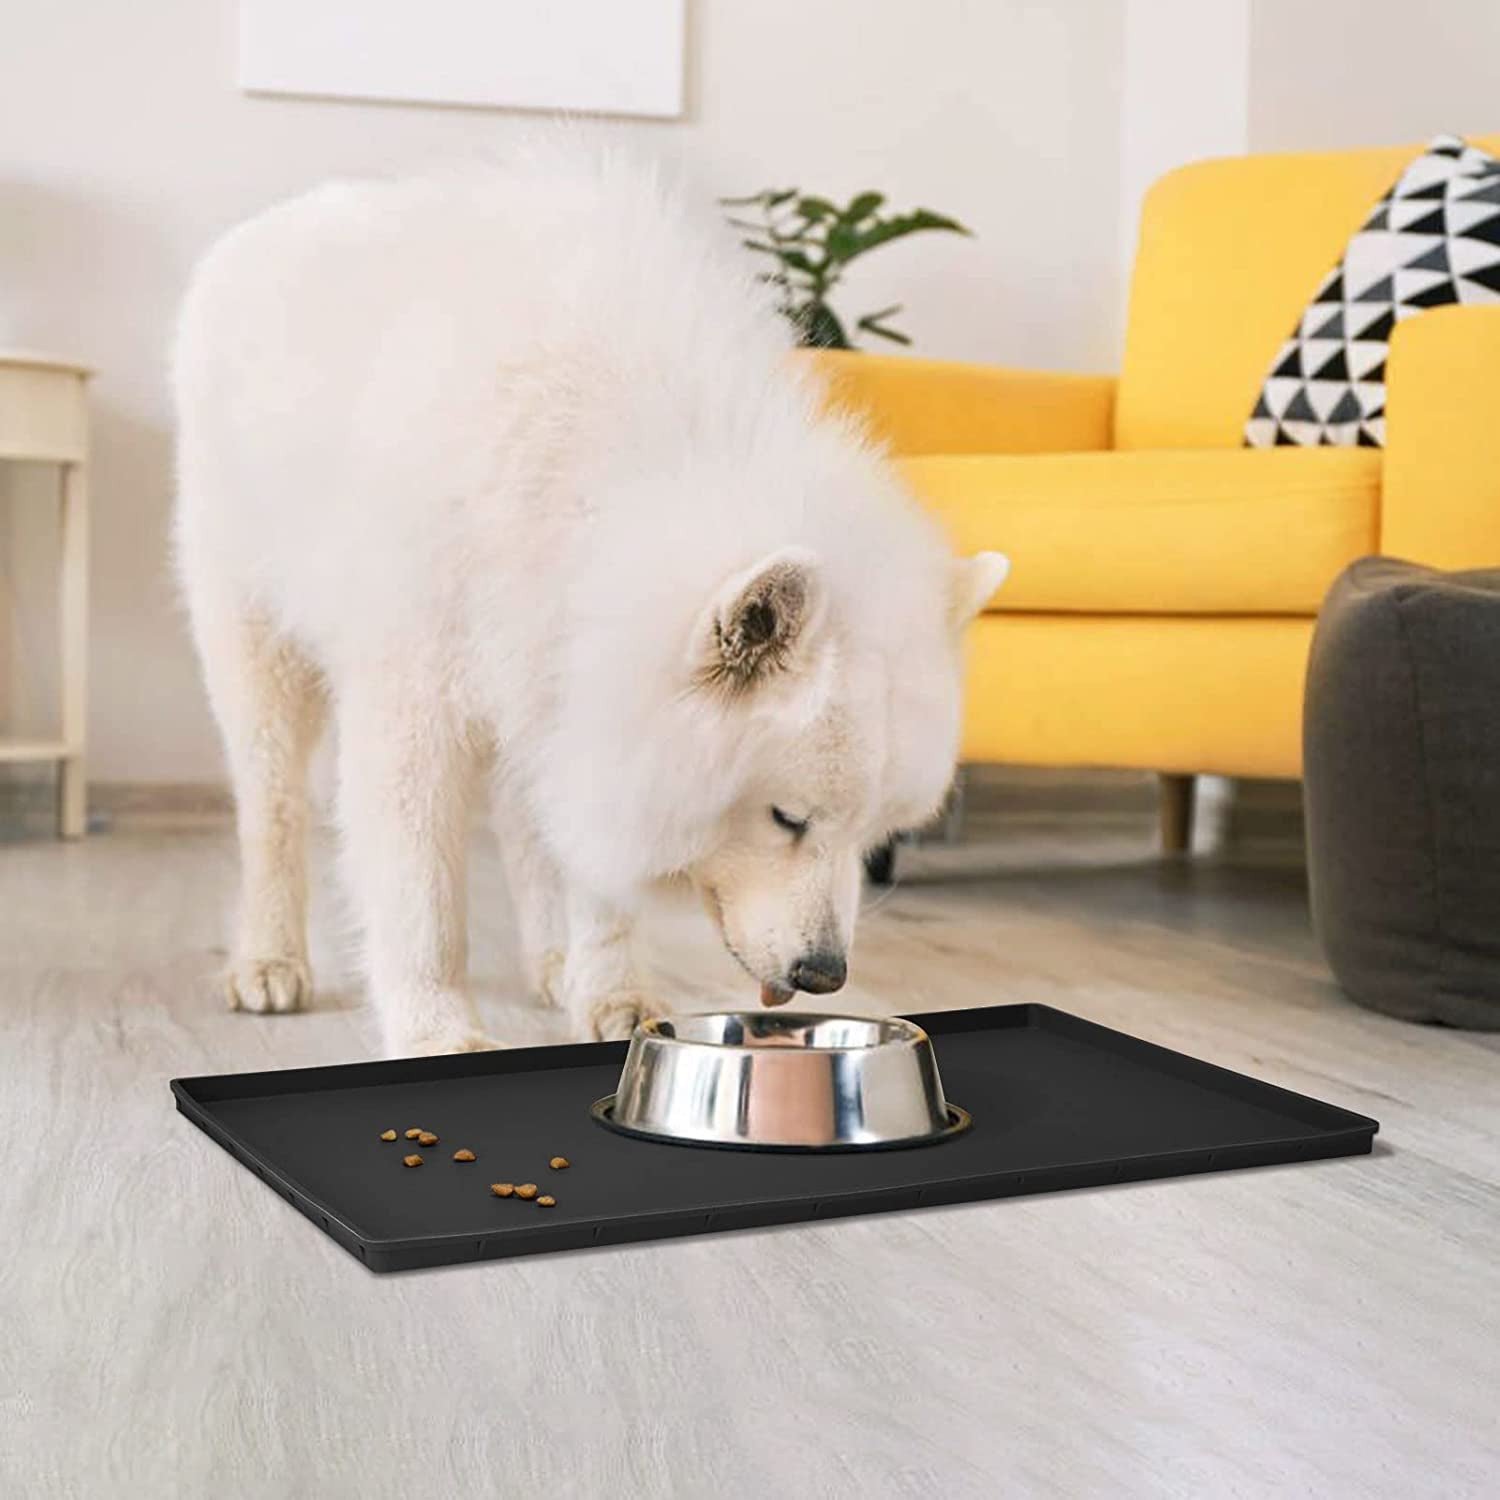 Dog Food Mat,Silicone Waterproof Dog Cat Food Tray,Non Slip Pet Bowl Mats Placemat,Size:(18.5" X 11.5") 0.6",(24" X 16") 0.6",(28" X 18") 0.8",(32" X 24") 1" Raised Edge